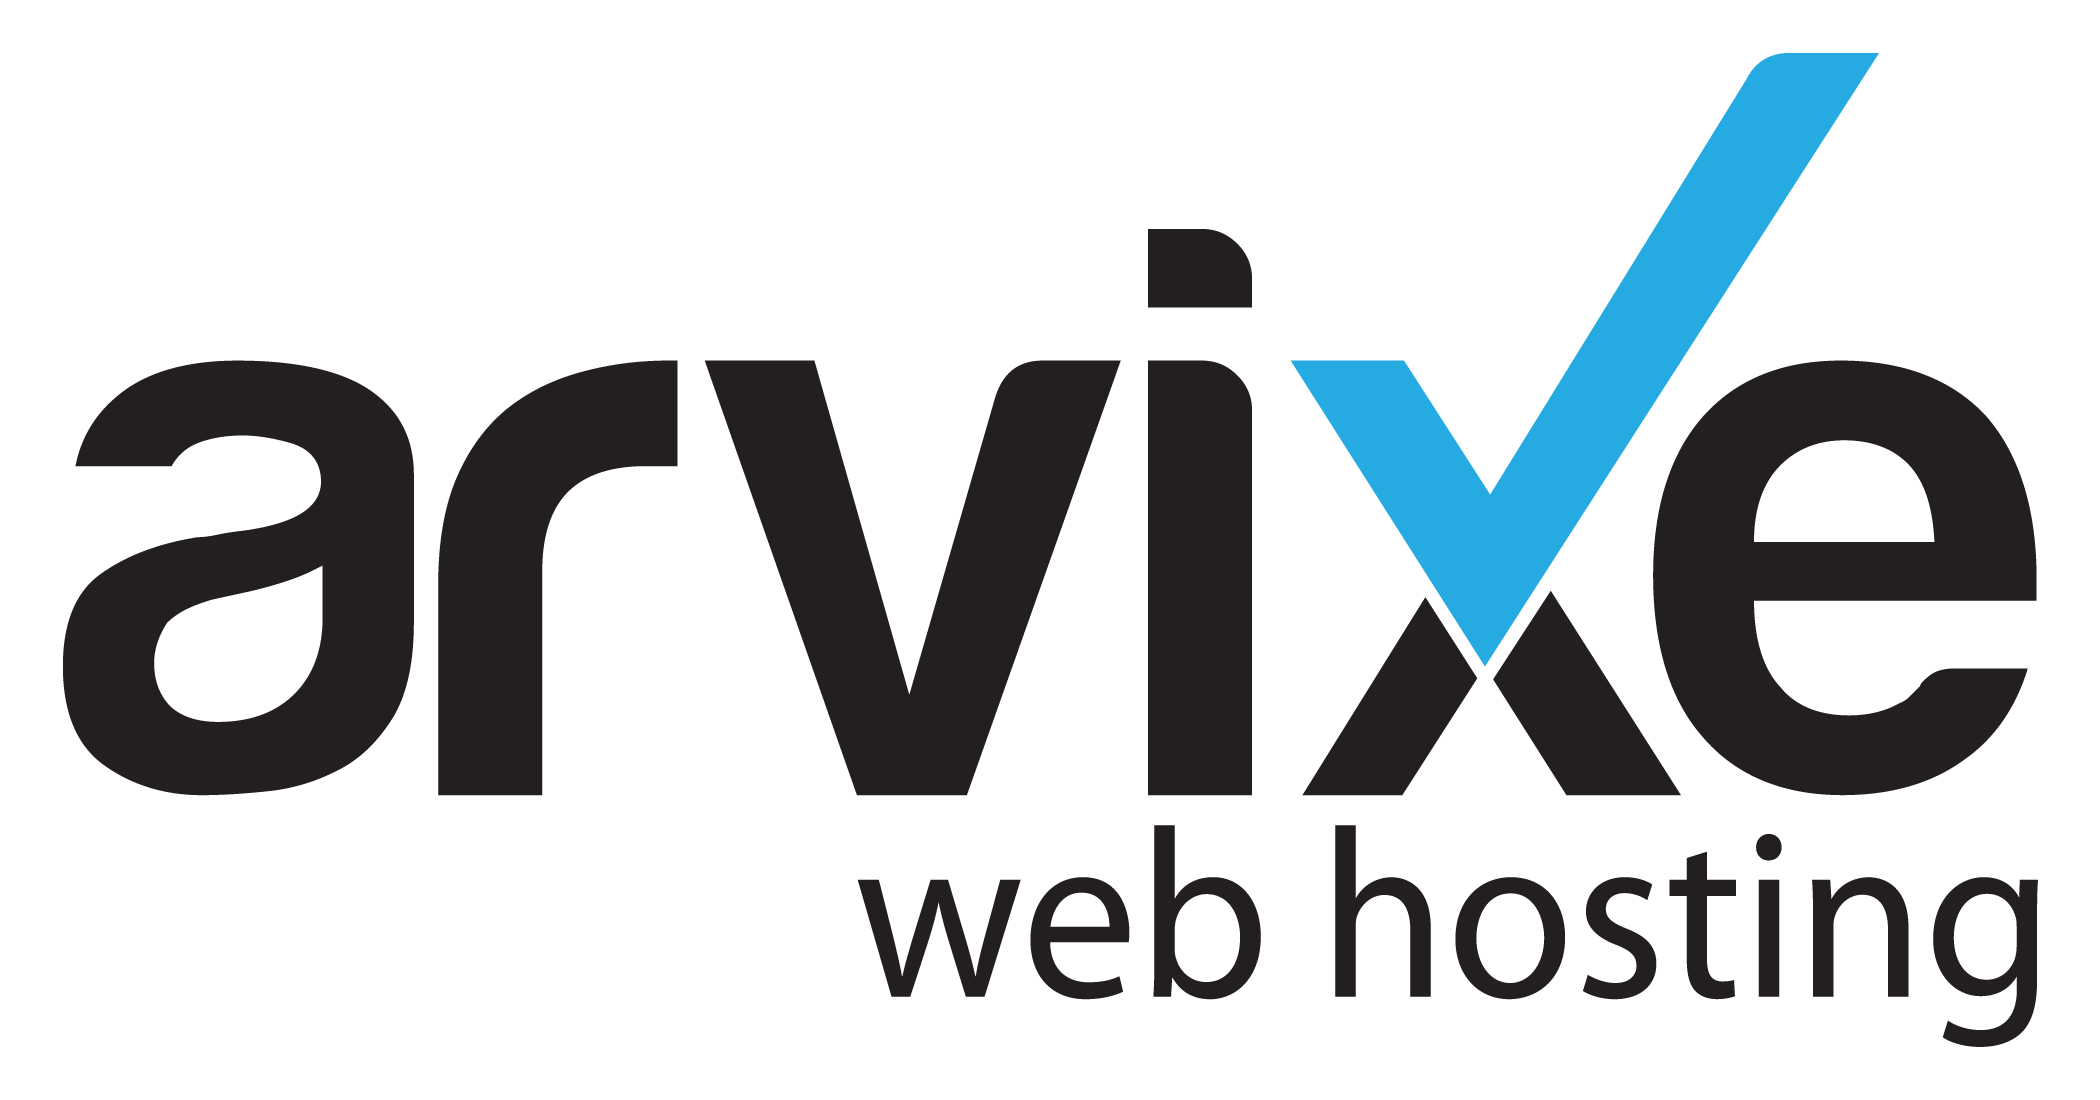 best web hosting for small business 2022 Best Web Hosting For Small Business 2022 arvixe logo 2100x1100 2